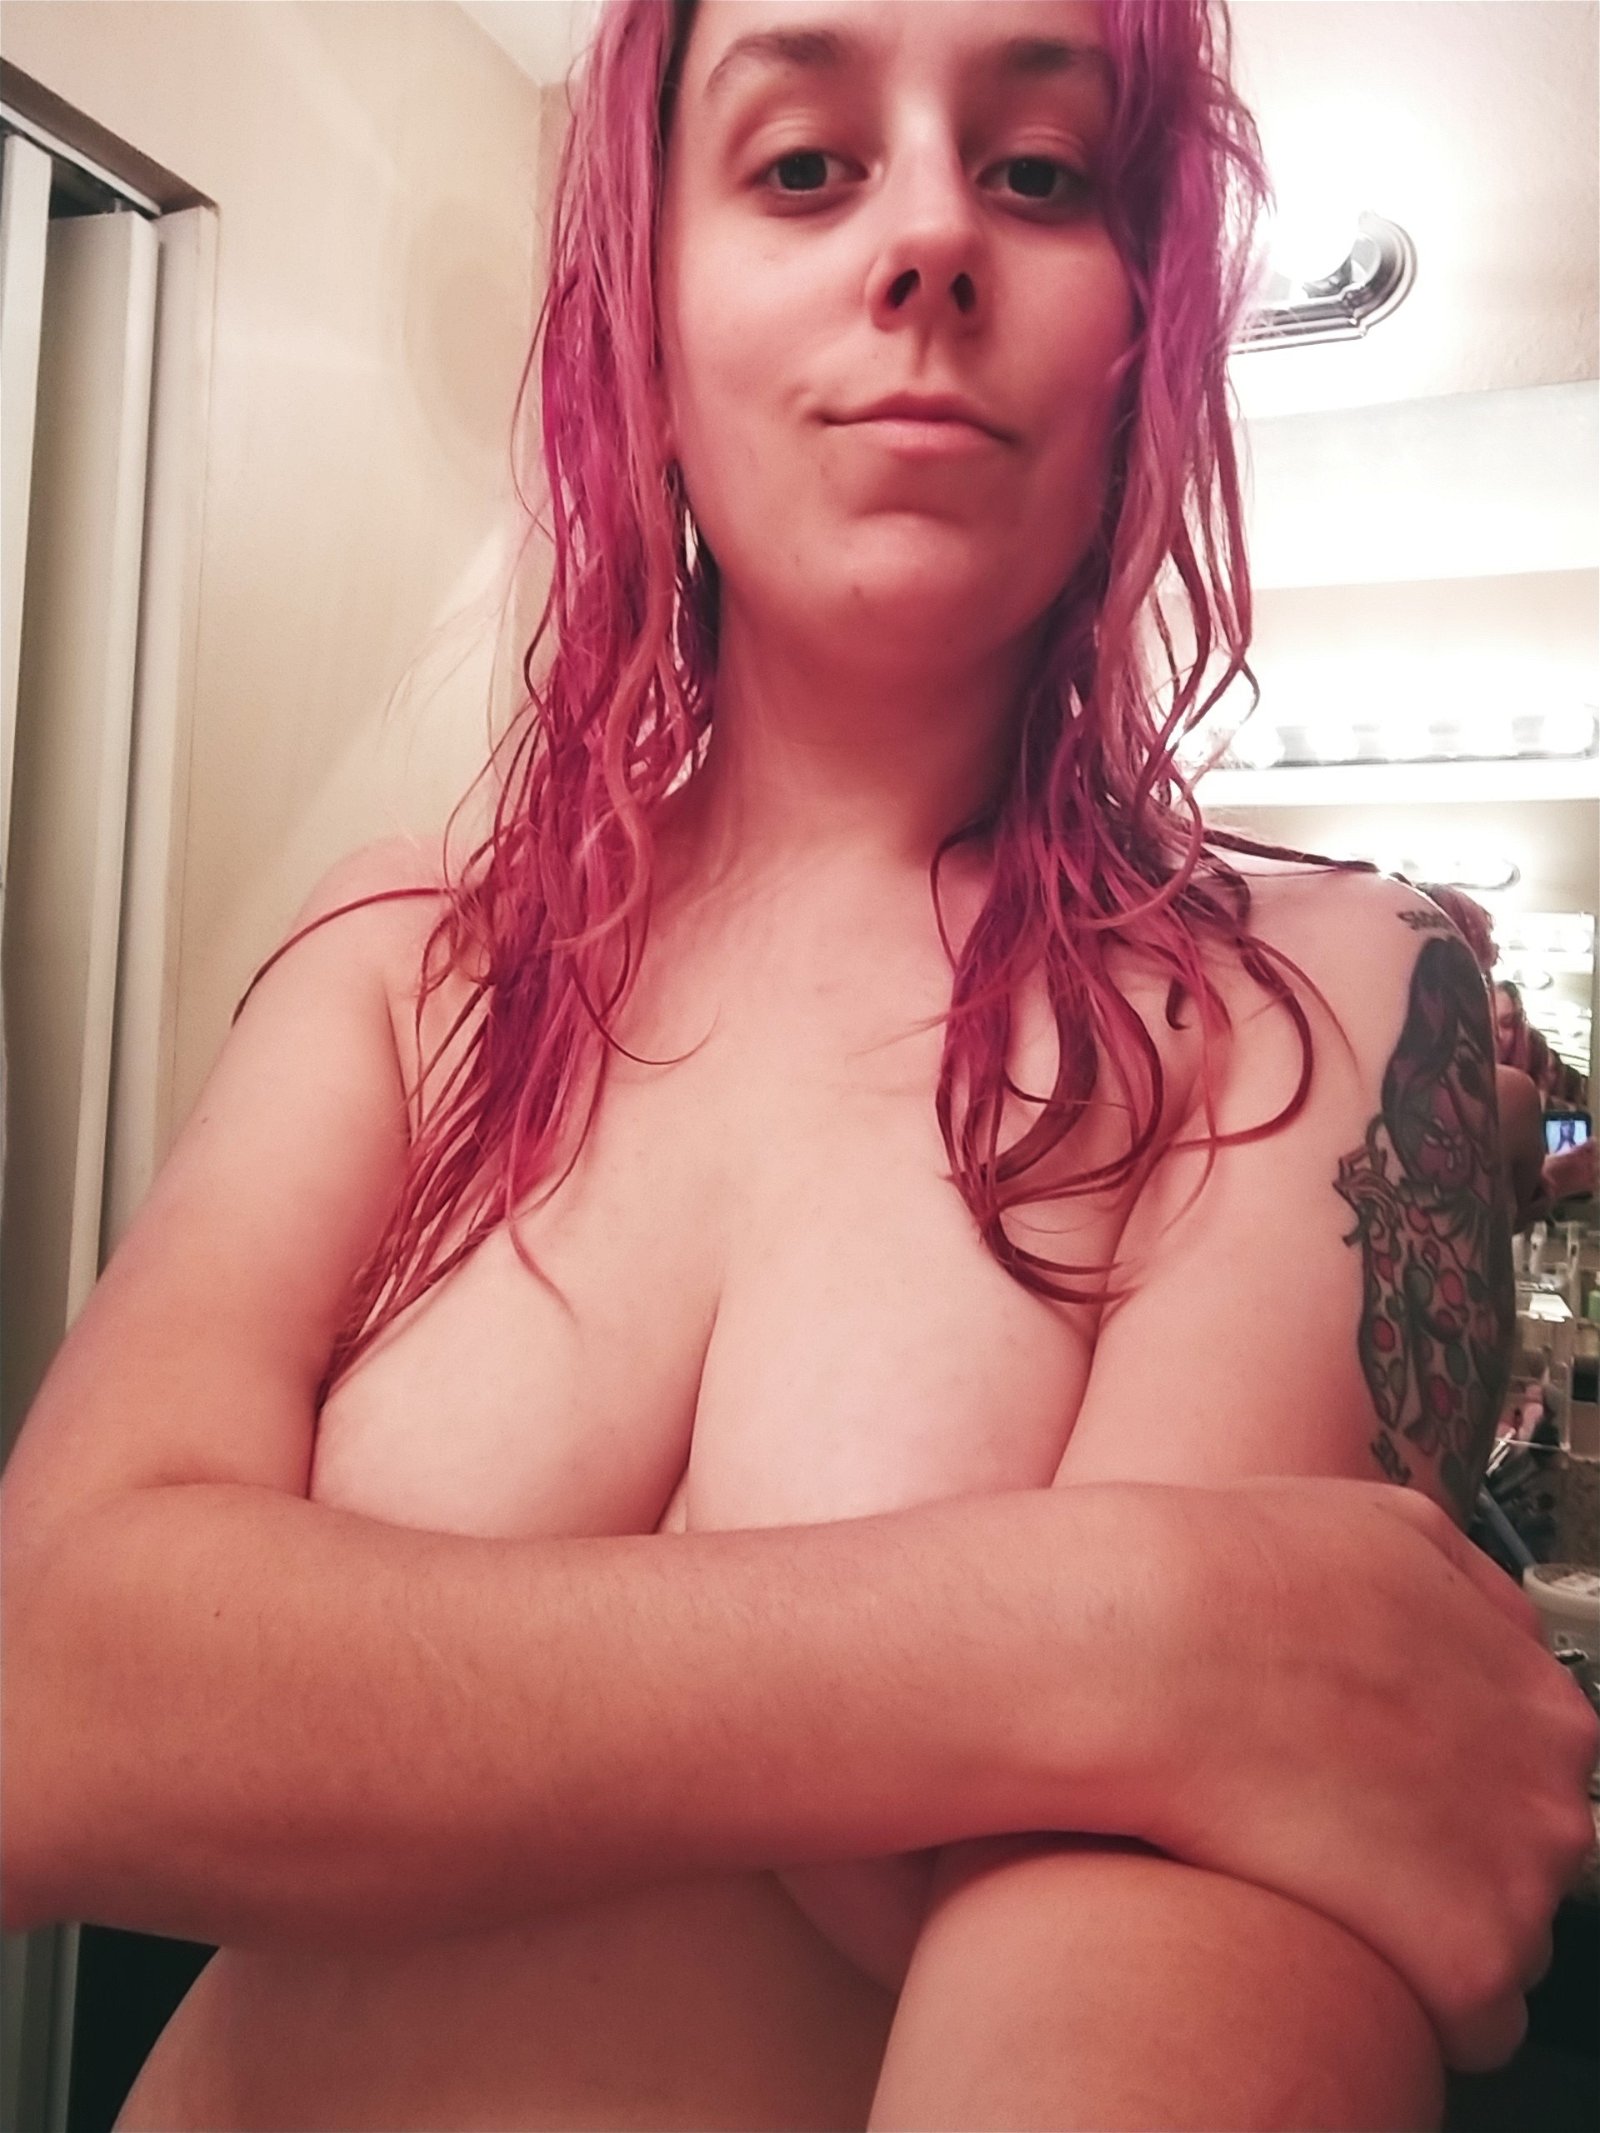 Photo by AkaraFang with the username @AkaraFang, who is a star user, posted on September 12, 2019. The post is about the topic Amateurs and the text says 'More uncensored content on my OF, only freebies here 

https://onlyfans.com/akarafang'